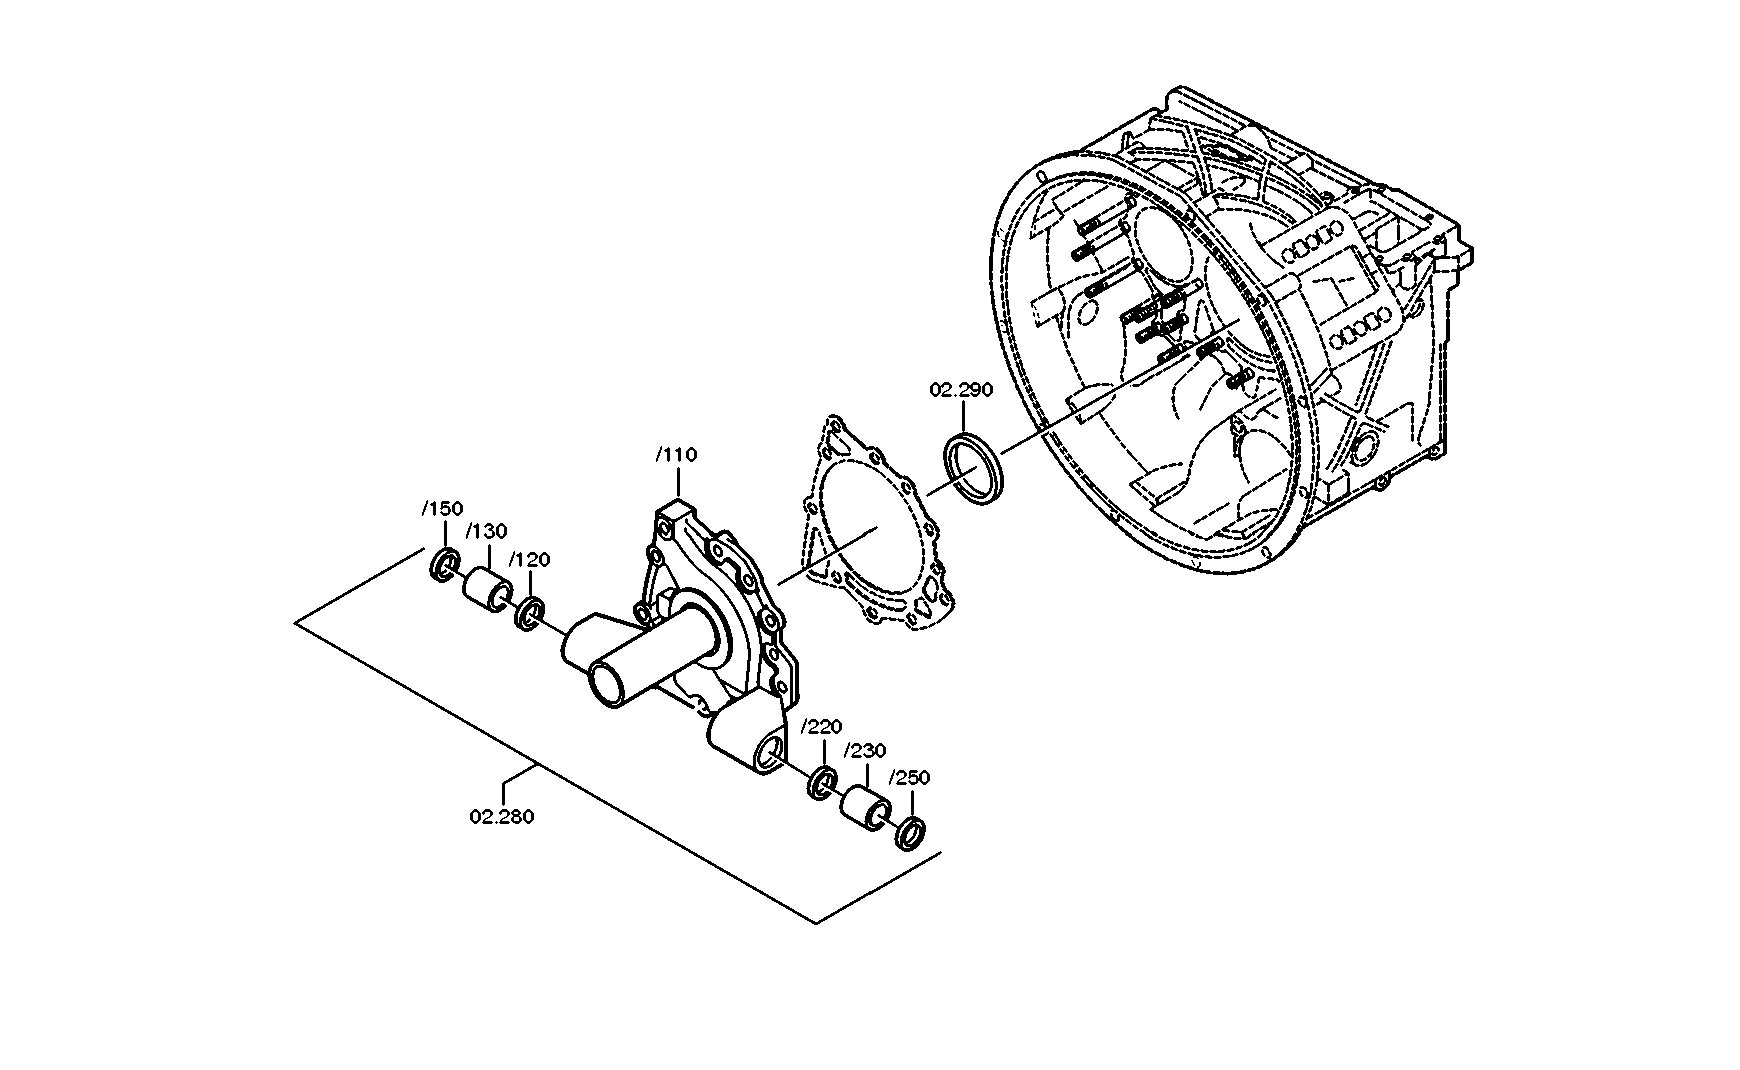 drawing for DAF 1600866 - ANBAUTEILE (figure 1)